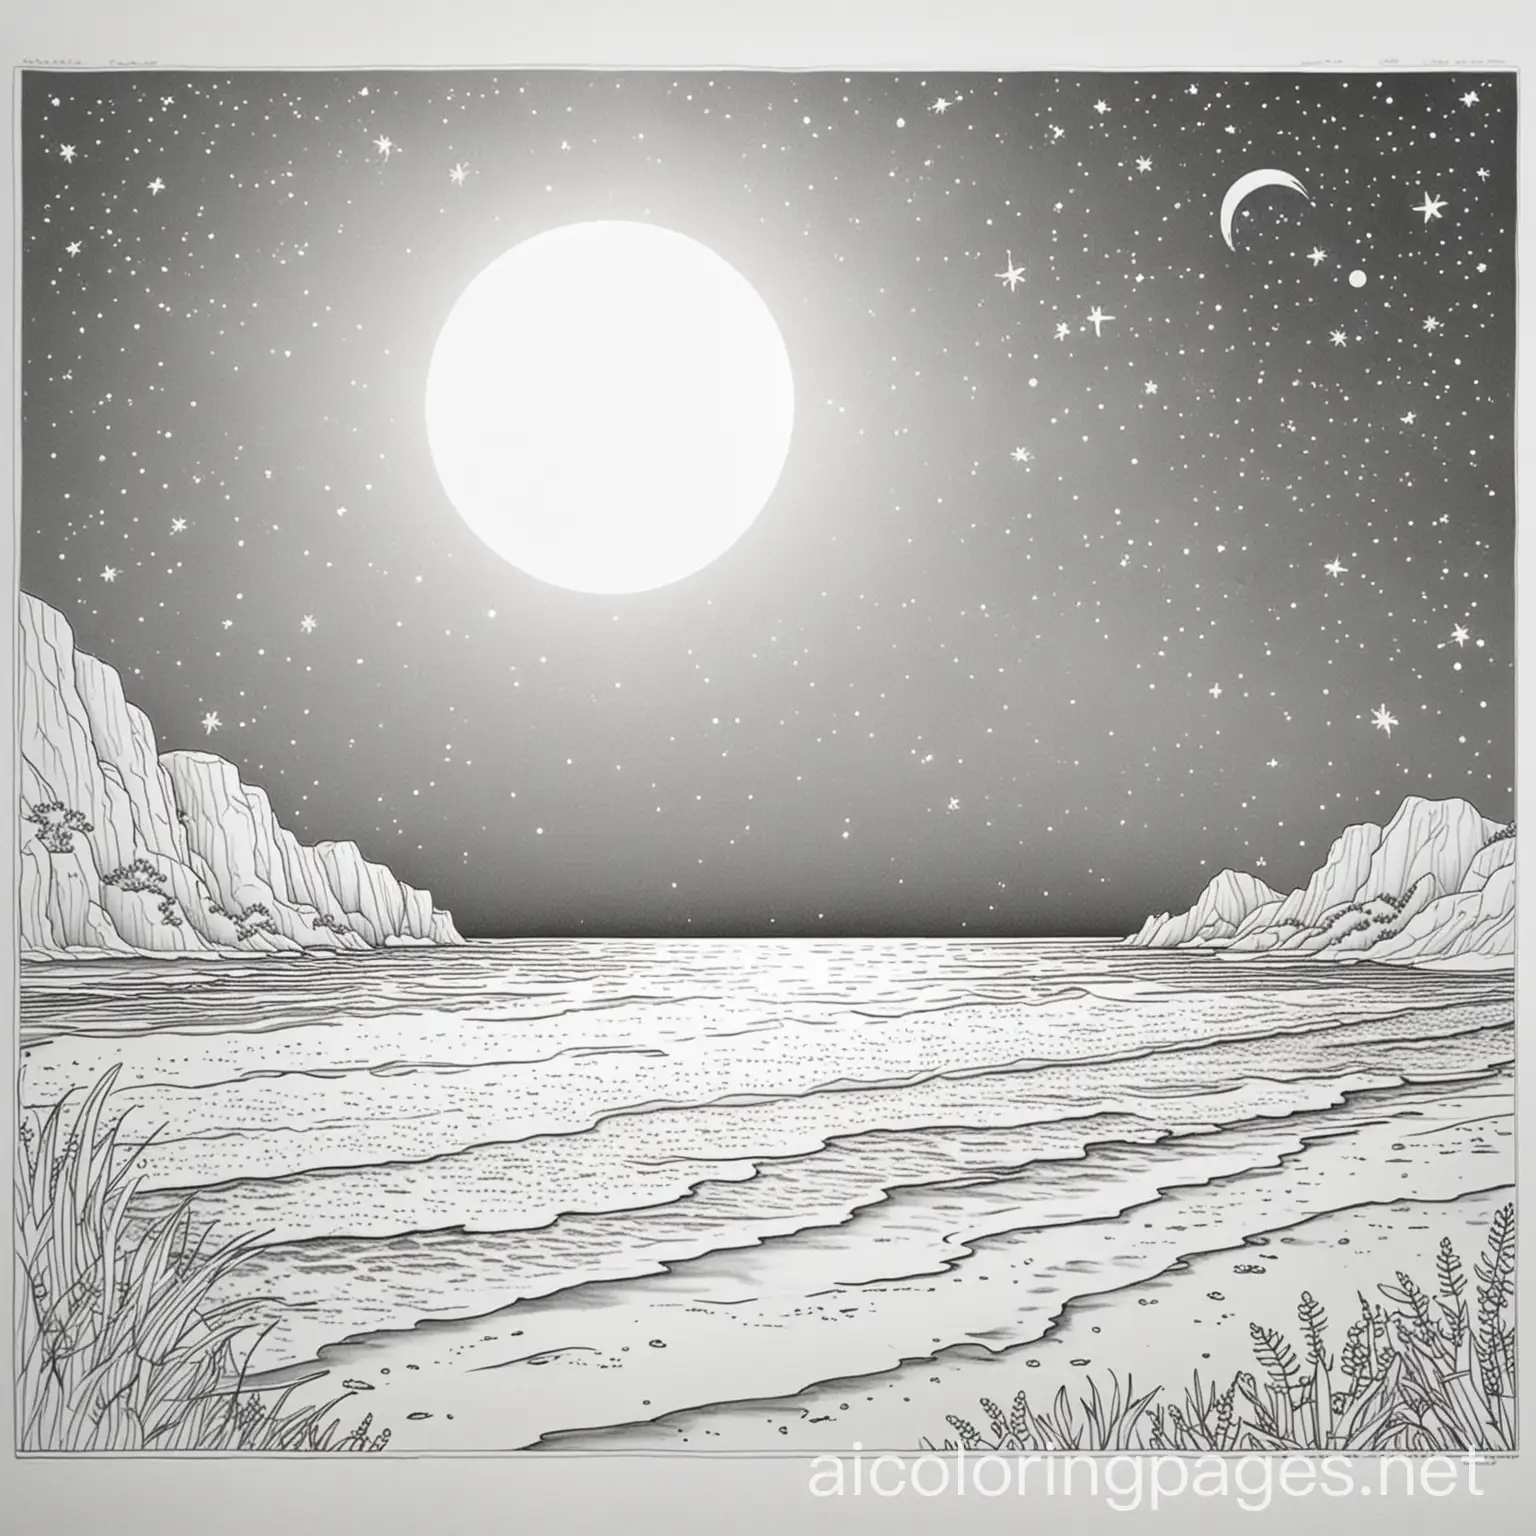 Starry-Beach-Night-Coloring-Page-Moonlit-Sky-and-Serene-Shoreline